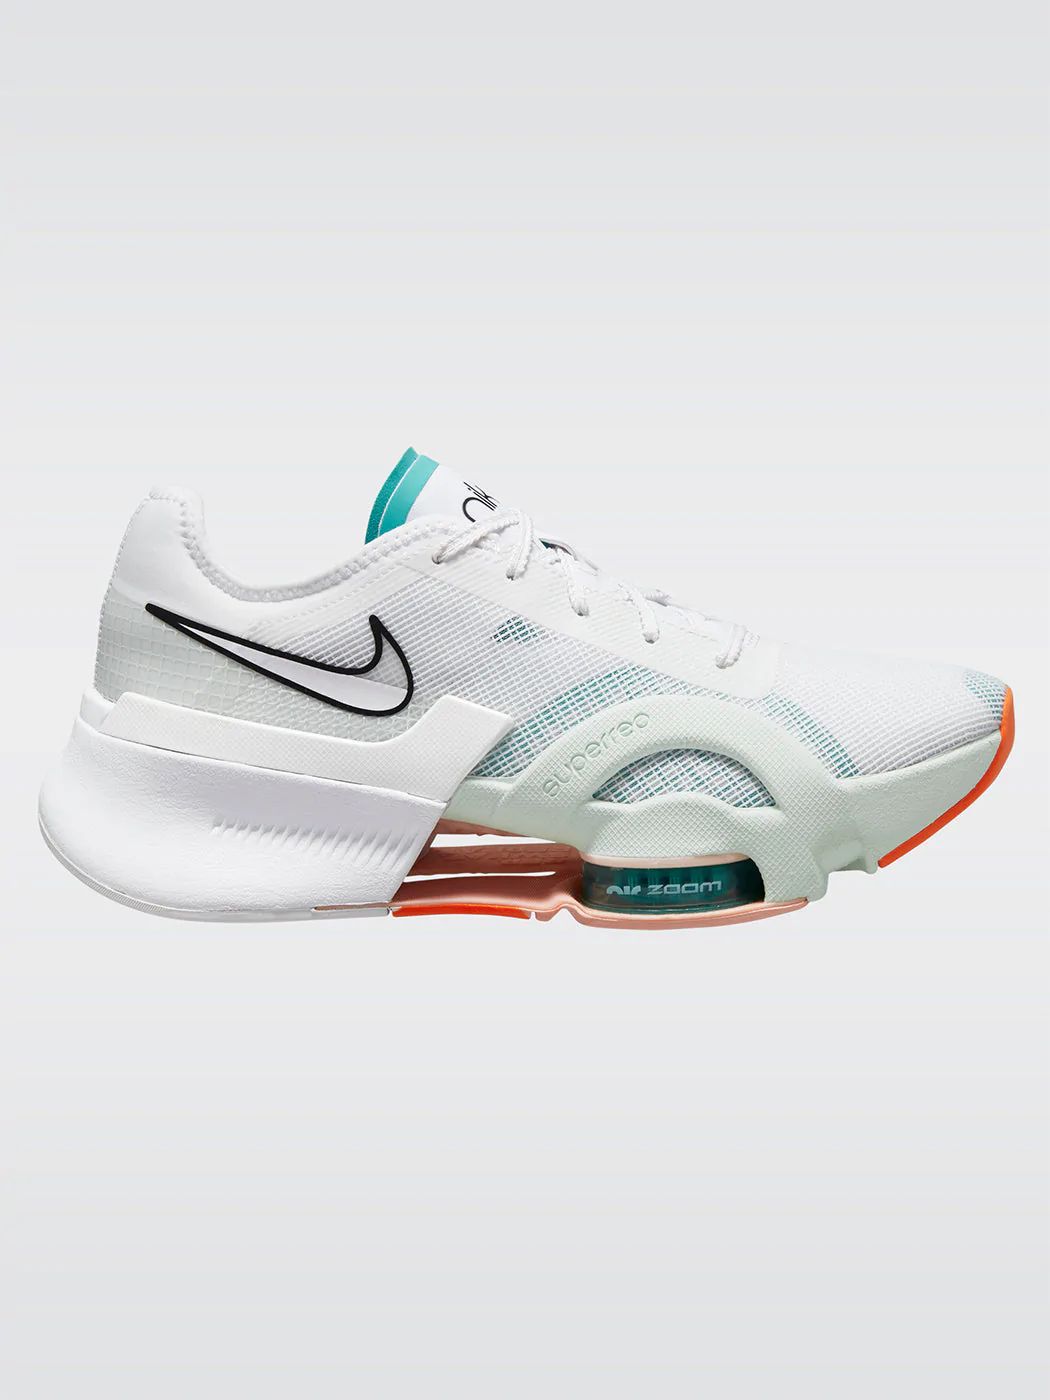 Nike Air Zoom SuperRep 3 - White-Black-Washed Teal-Barely Green | Carbon38